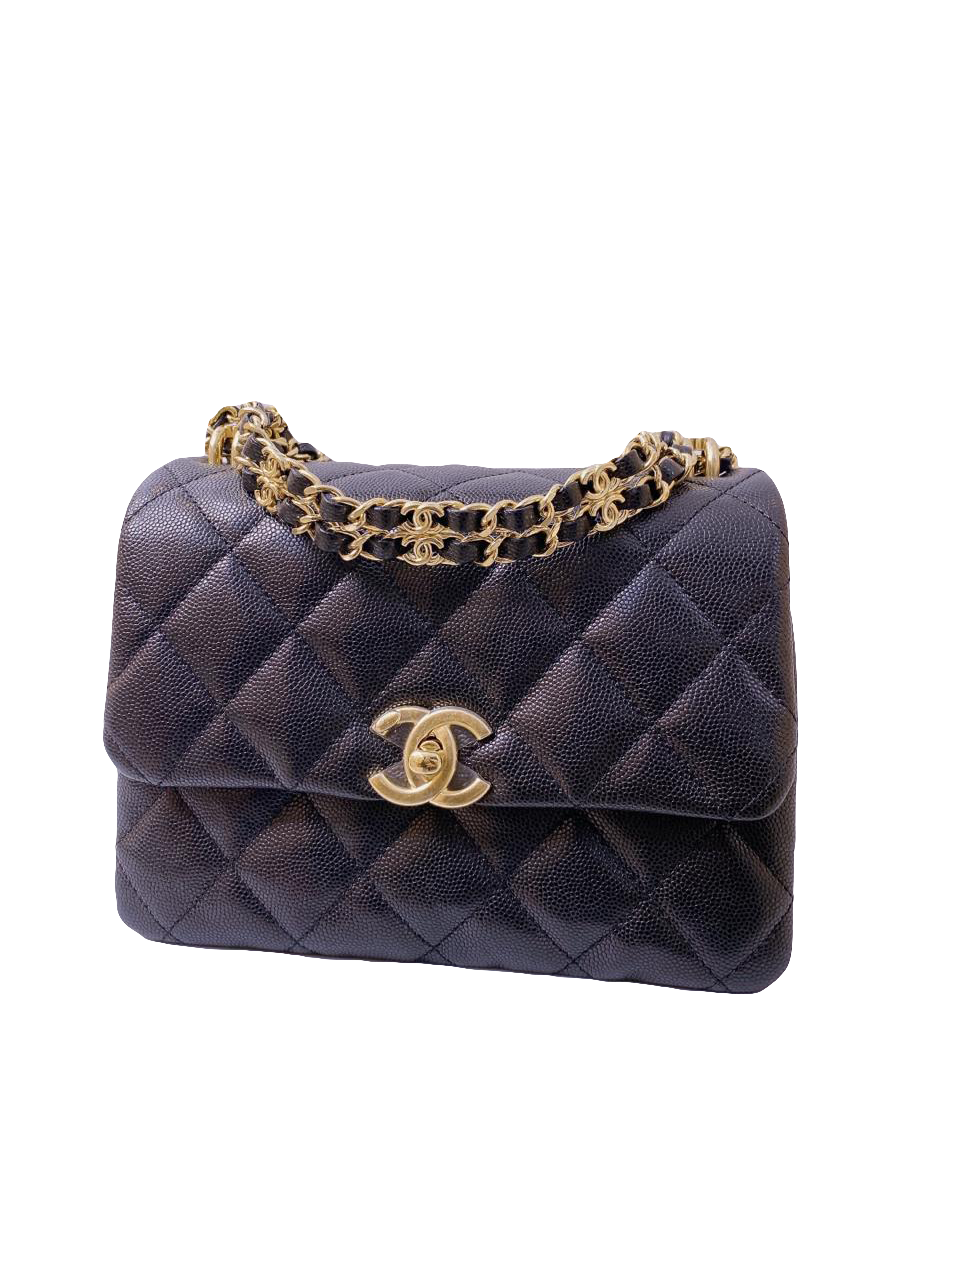 Chanel Black Caviar Quilted Leather Mini Square Classic Flap Bag GHW  Authentic